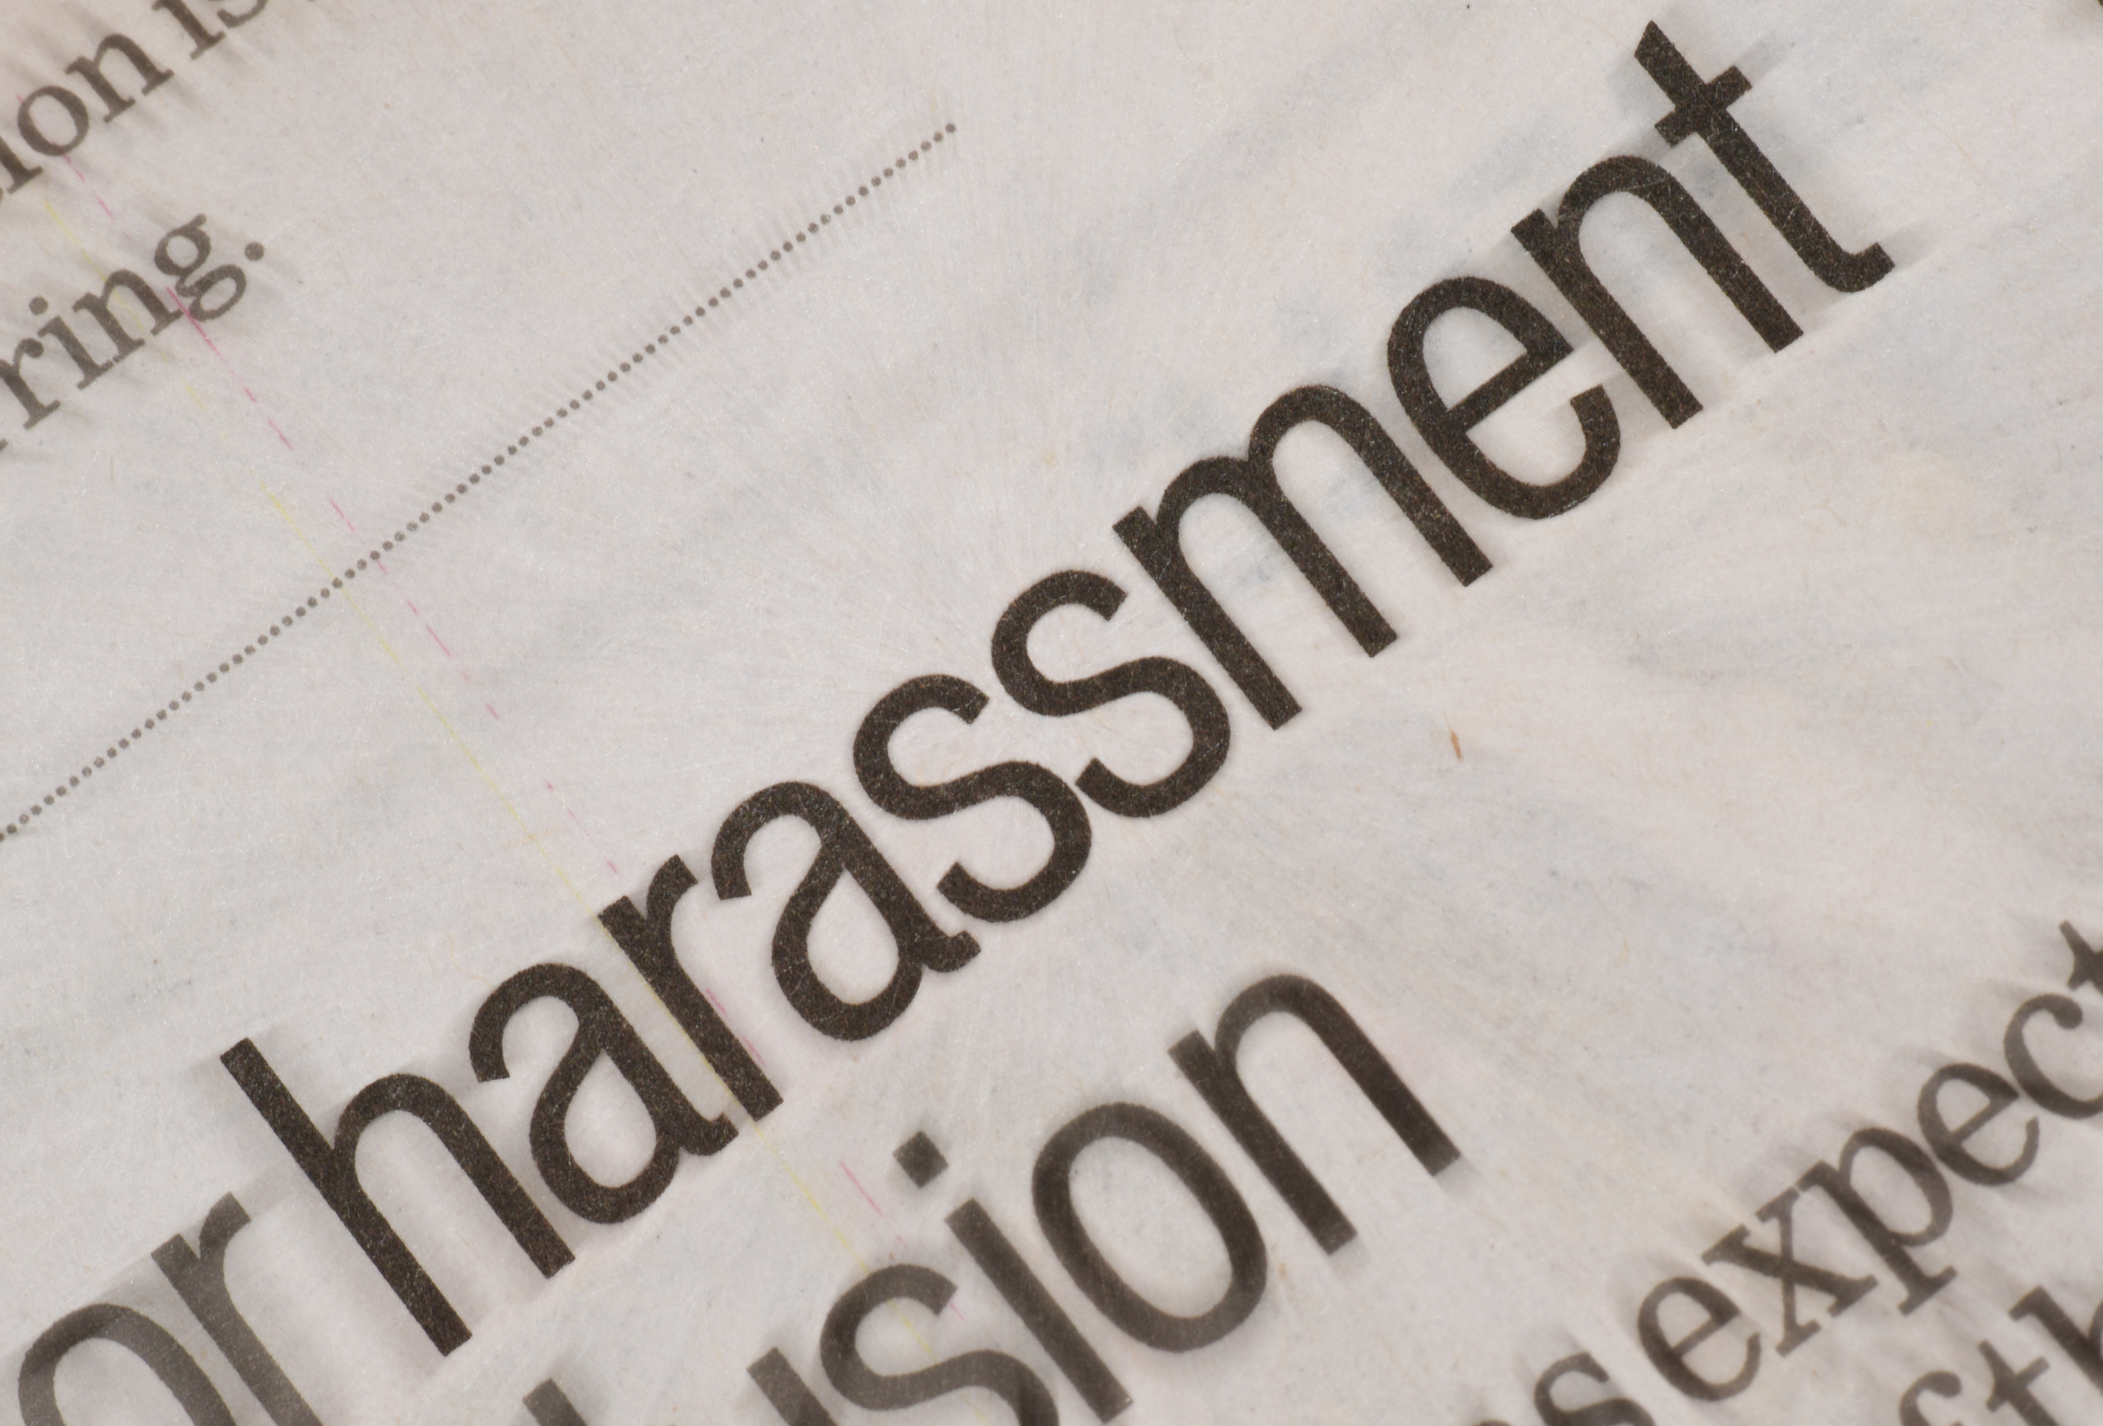 sexual harassment lawyer in New York City (NYC)